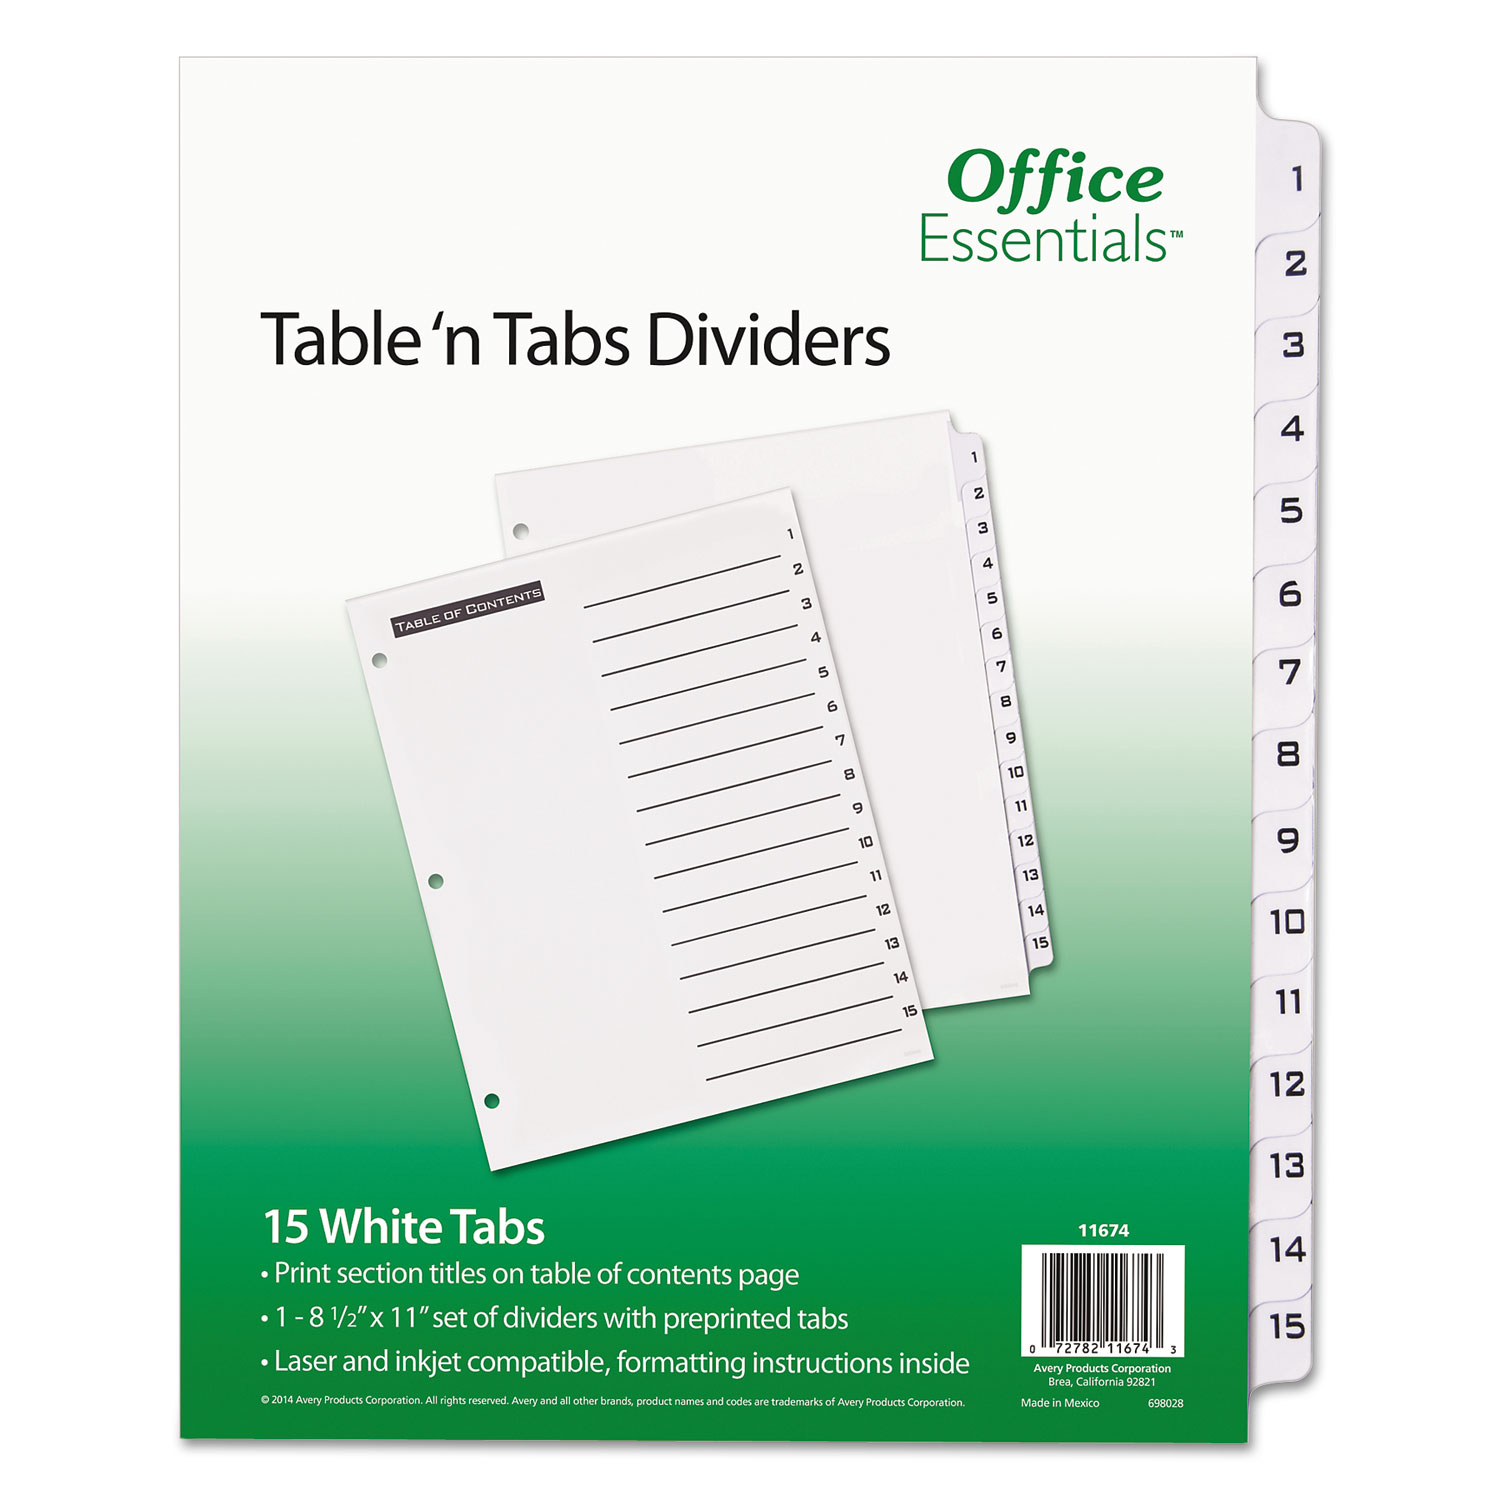  Office Essentials 11674 Table 'n Tabs Dividers, 15-Tab, 1 to 15, 11 x 8.5, White, 1 Set (AVE11674) 